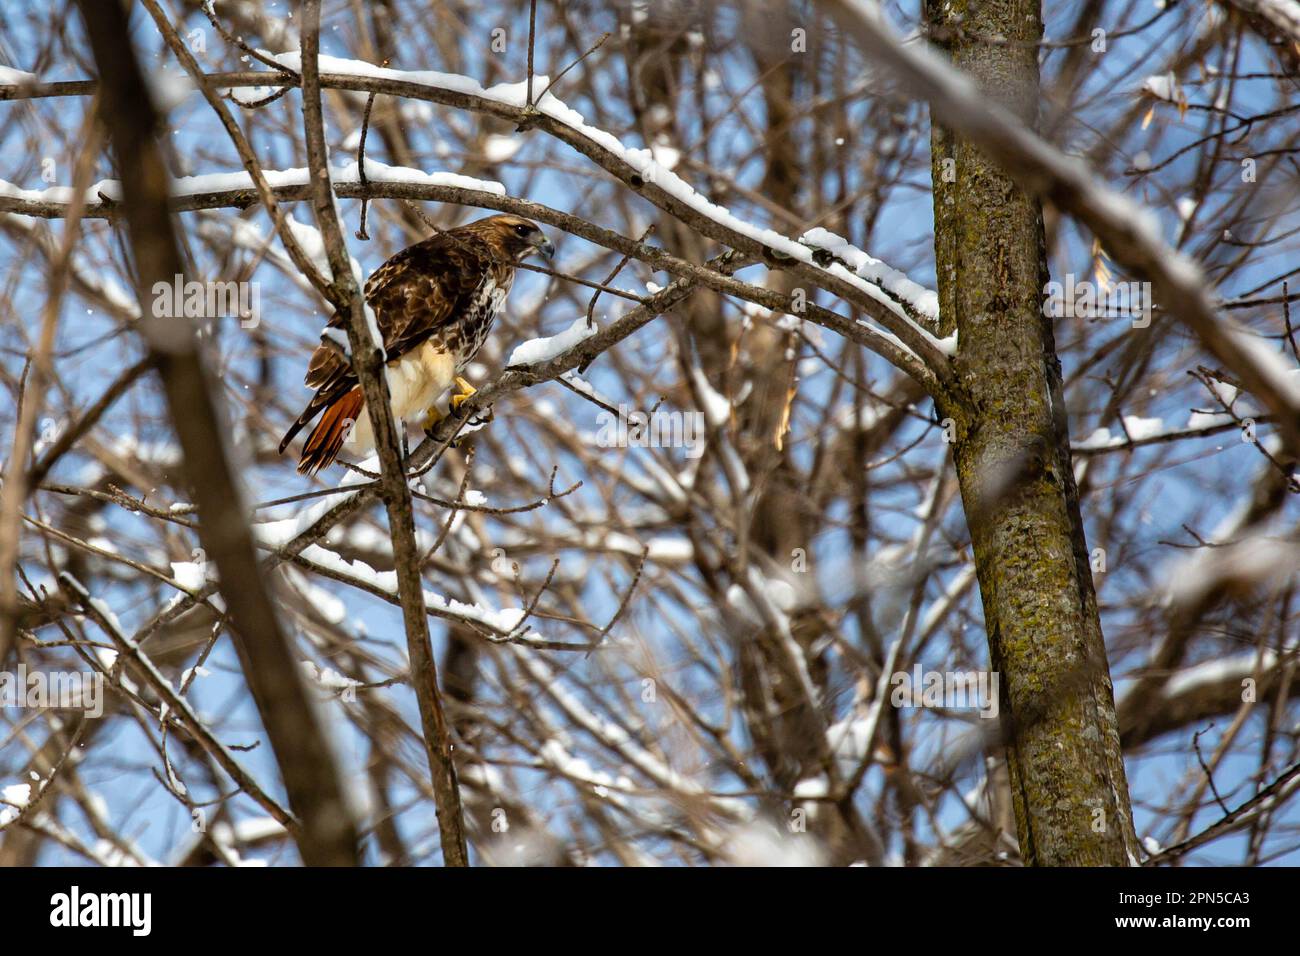 Red-tailed Hawk (Buteo jamaicensis) perched on a snow covered branch, horizontal Stock Photo